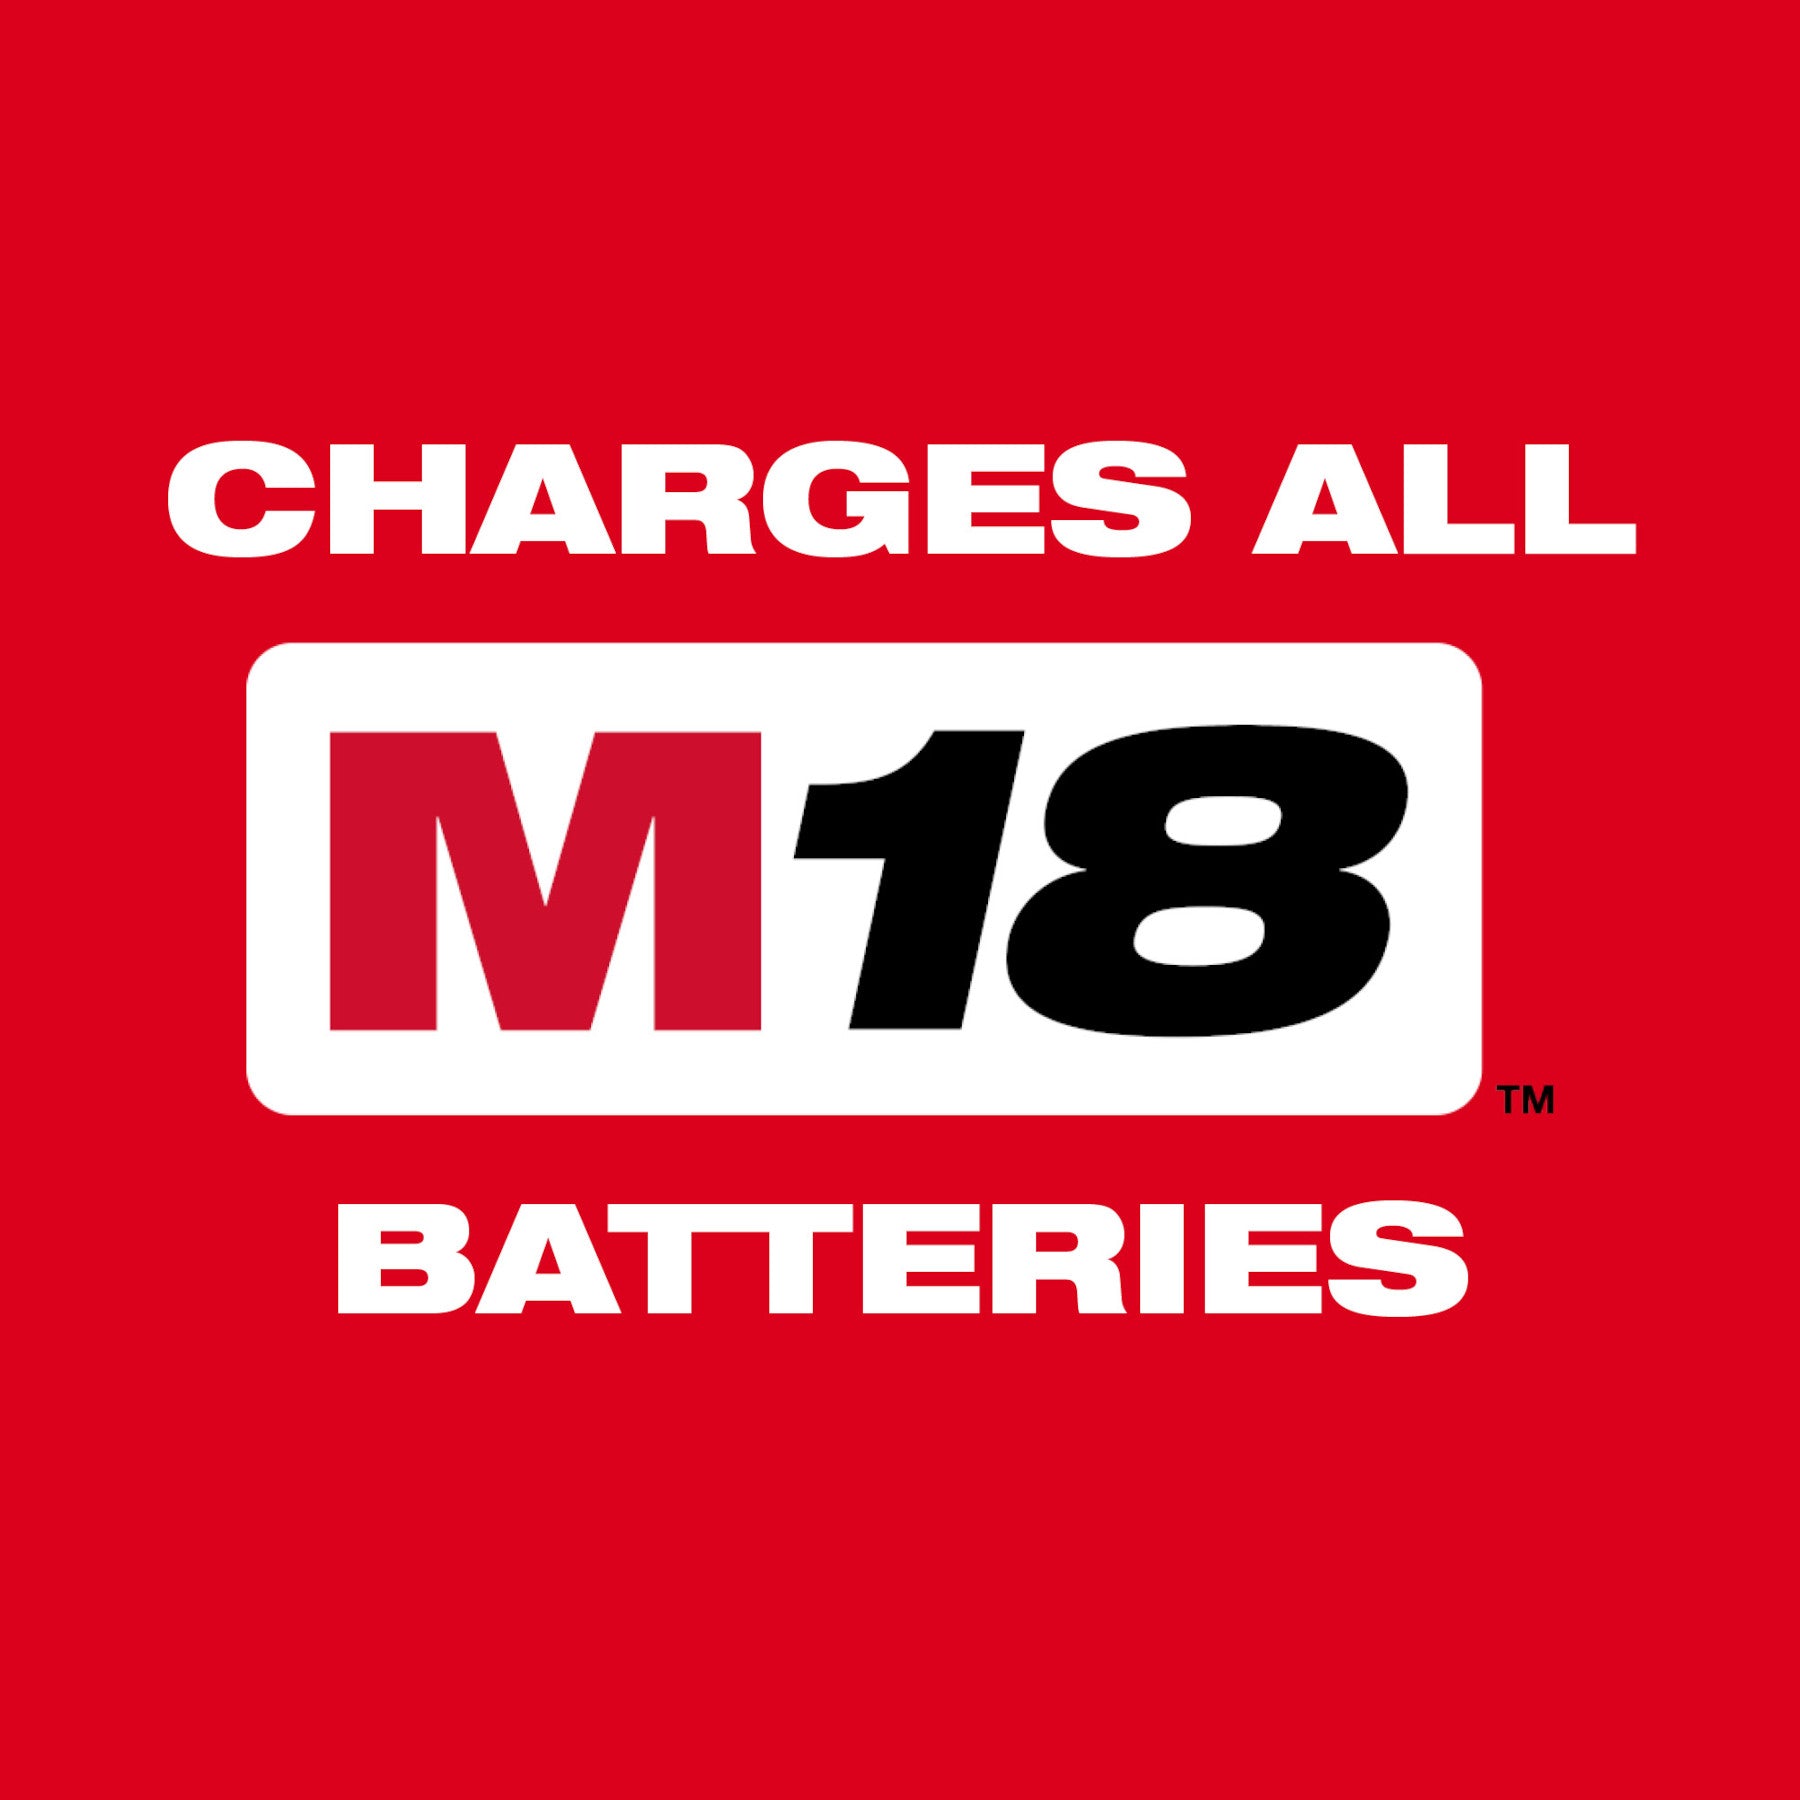 Milwaukee 48-59-1809 M18 PACKOUT Six Bay Rapid Charger